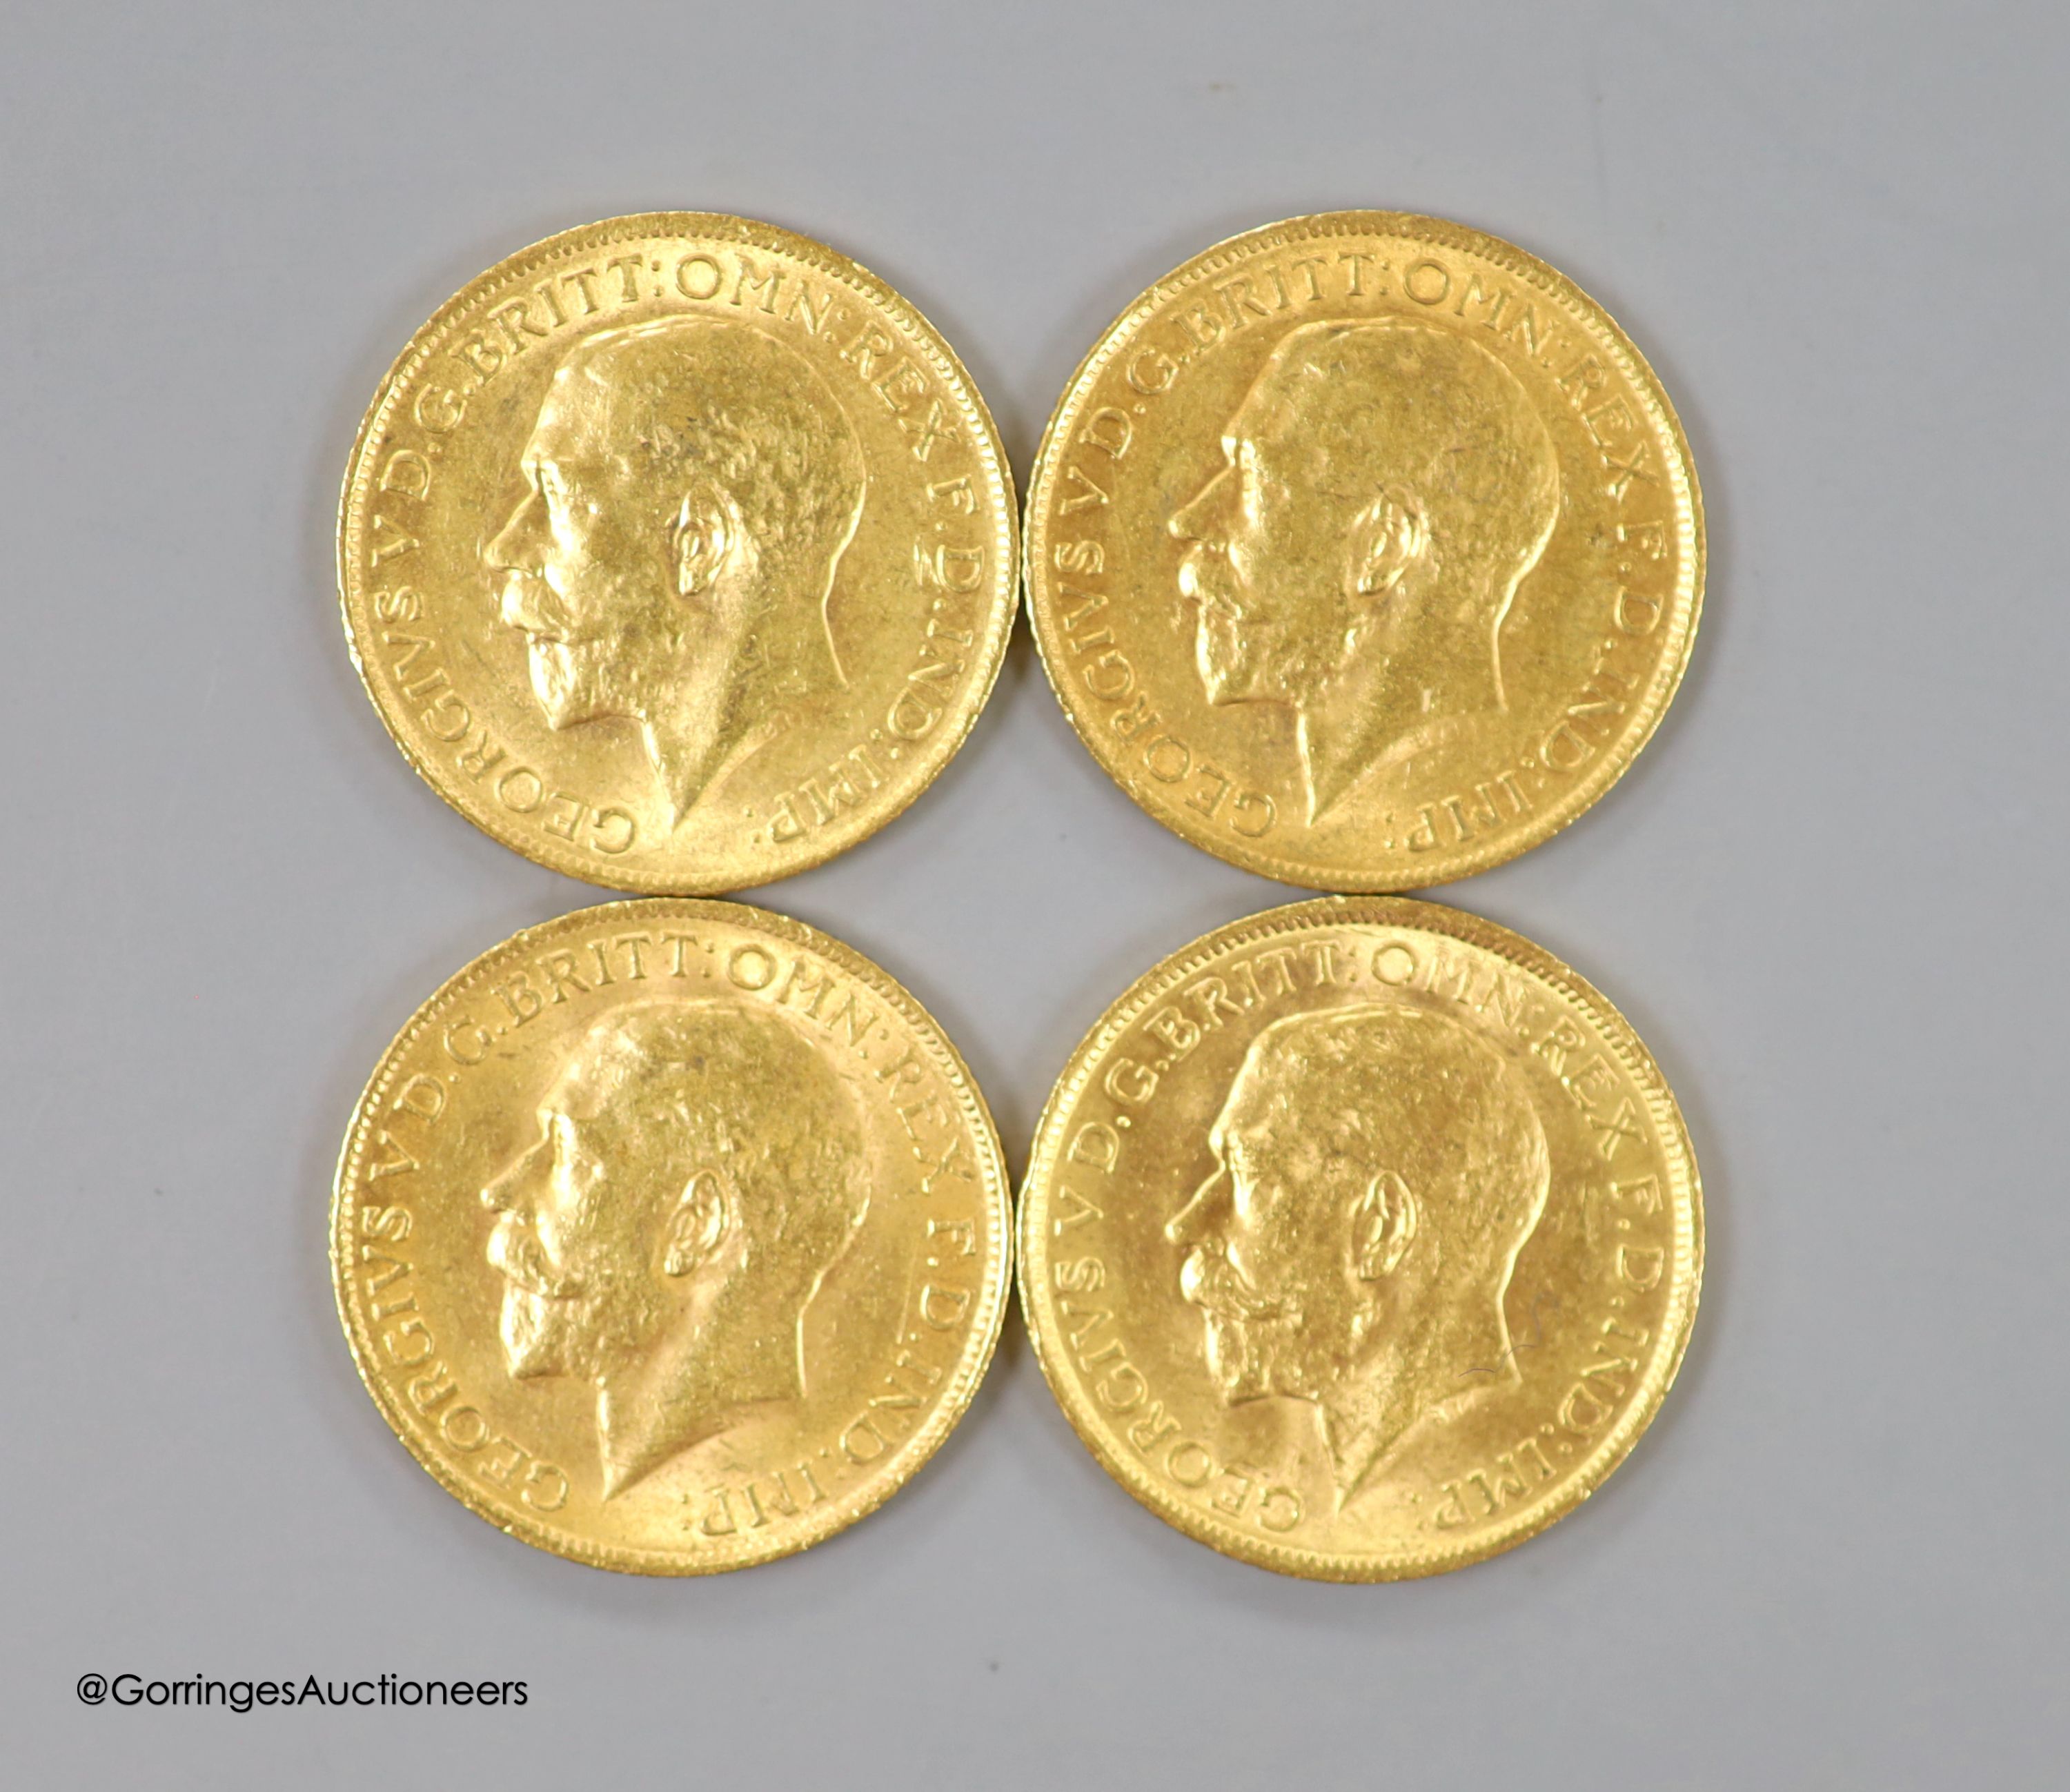 Four George V gold sovereigns, two 1912 and two 1914 (one Sydney mint)